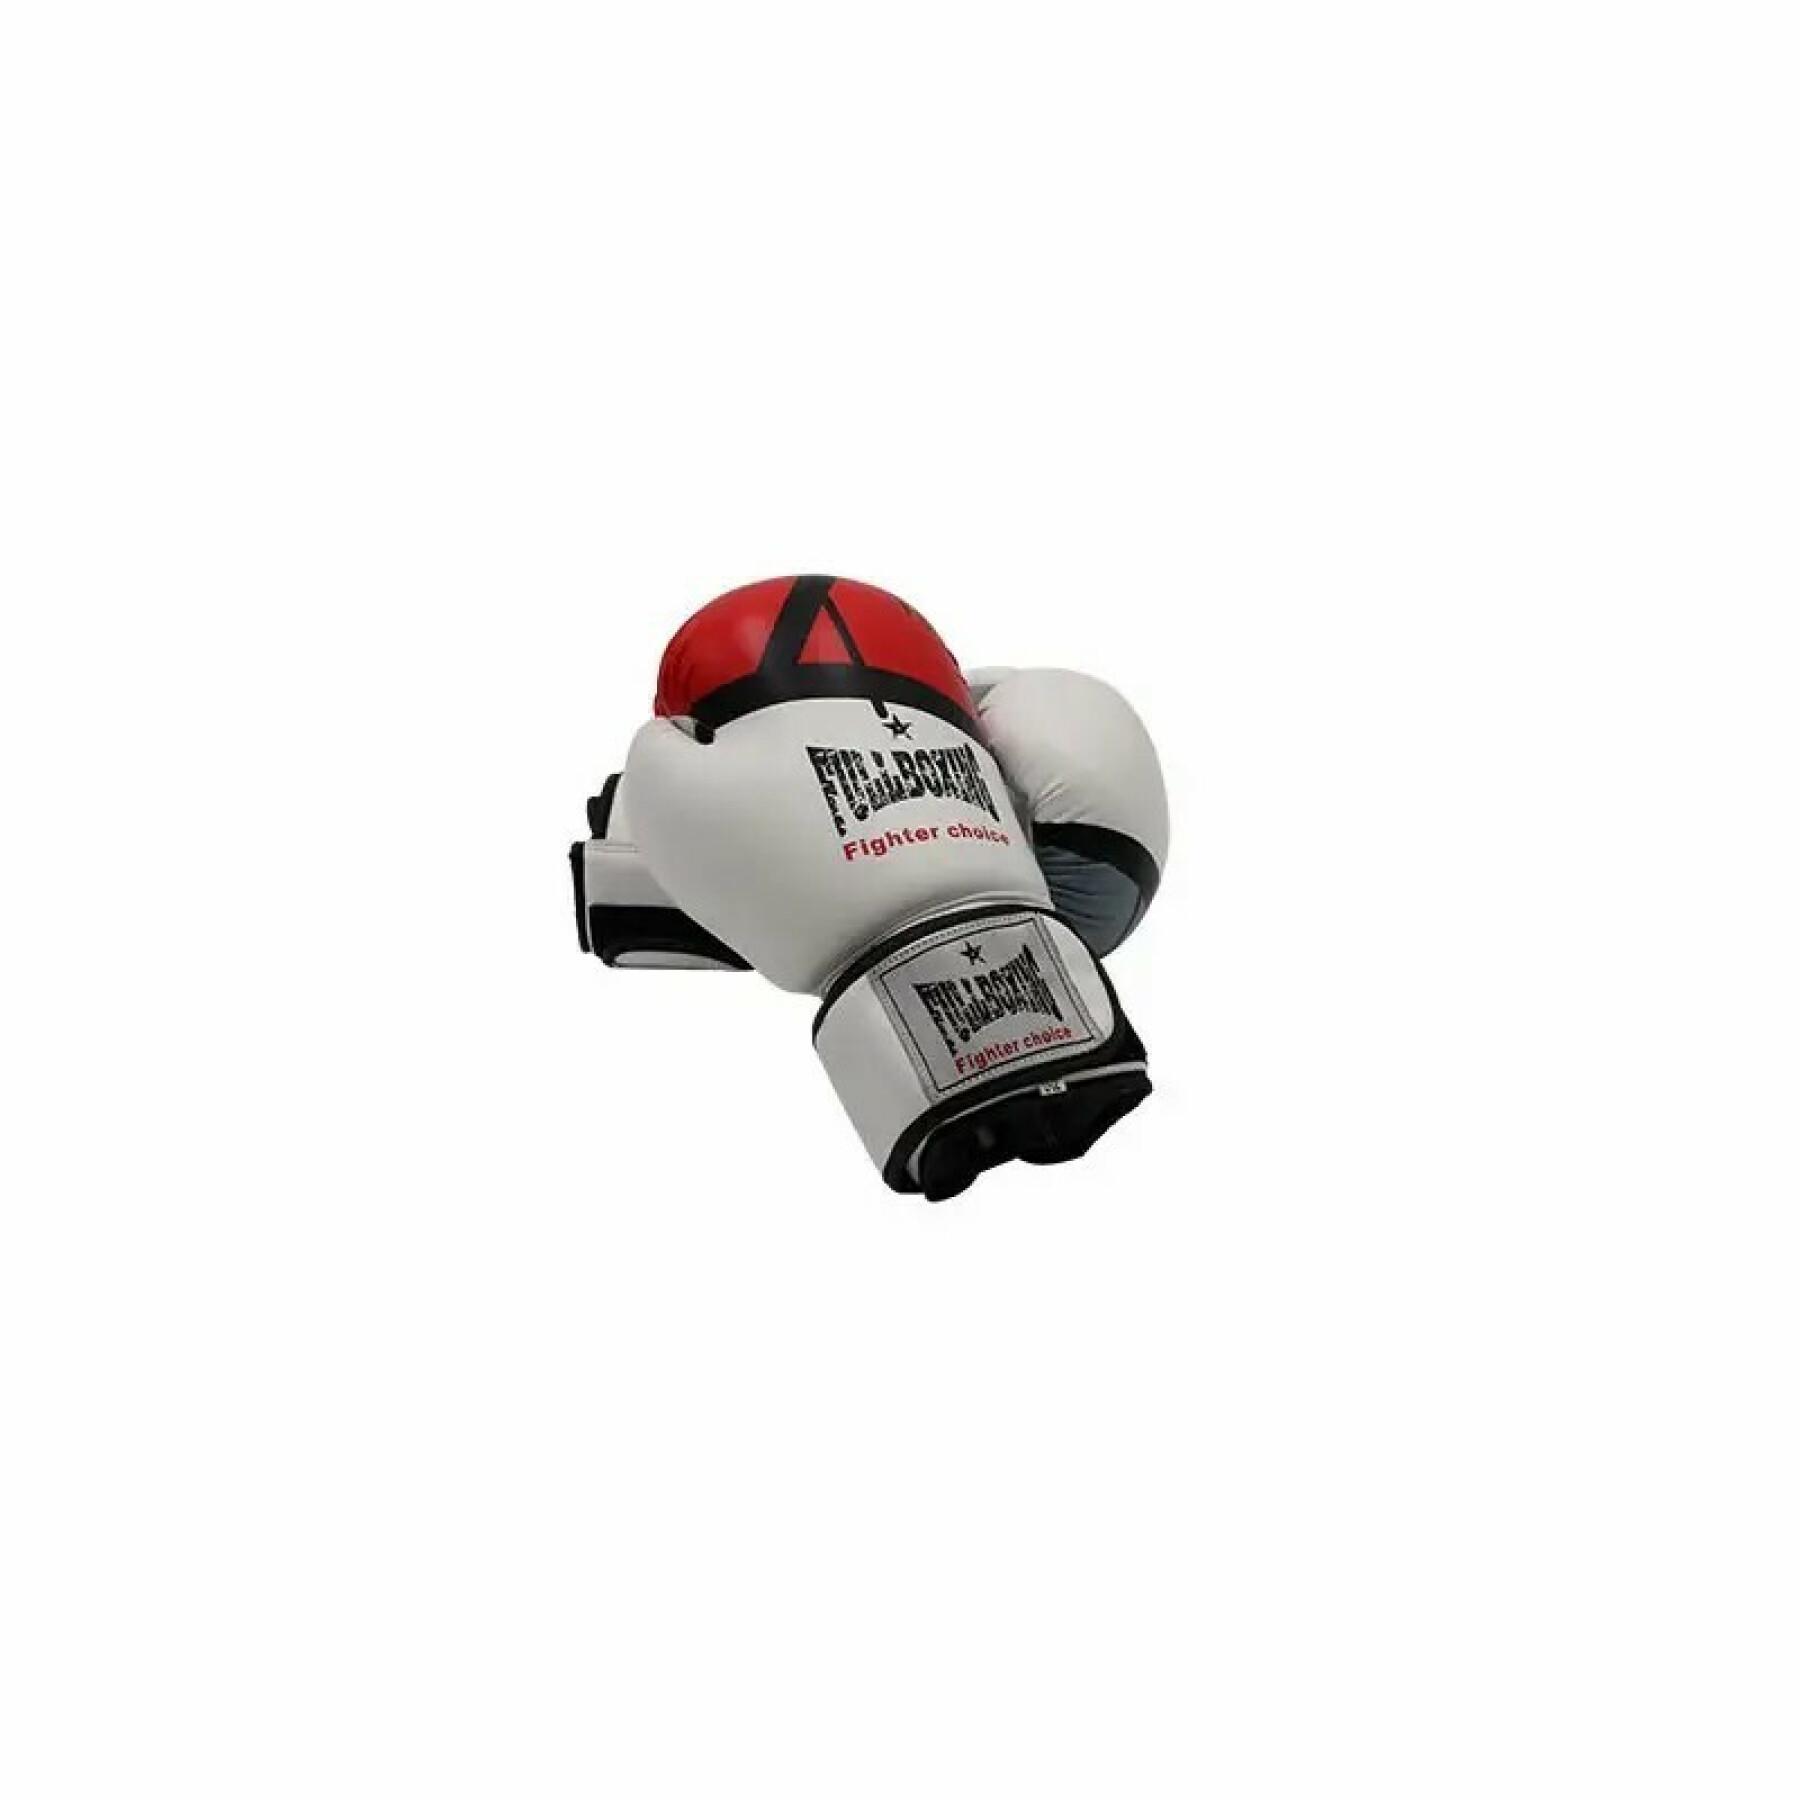 Boxing gloves Fullboxing Crater